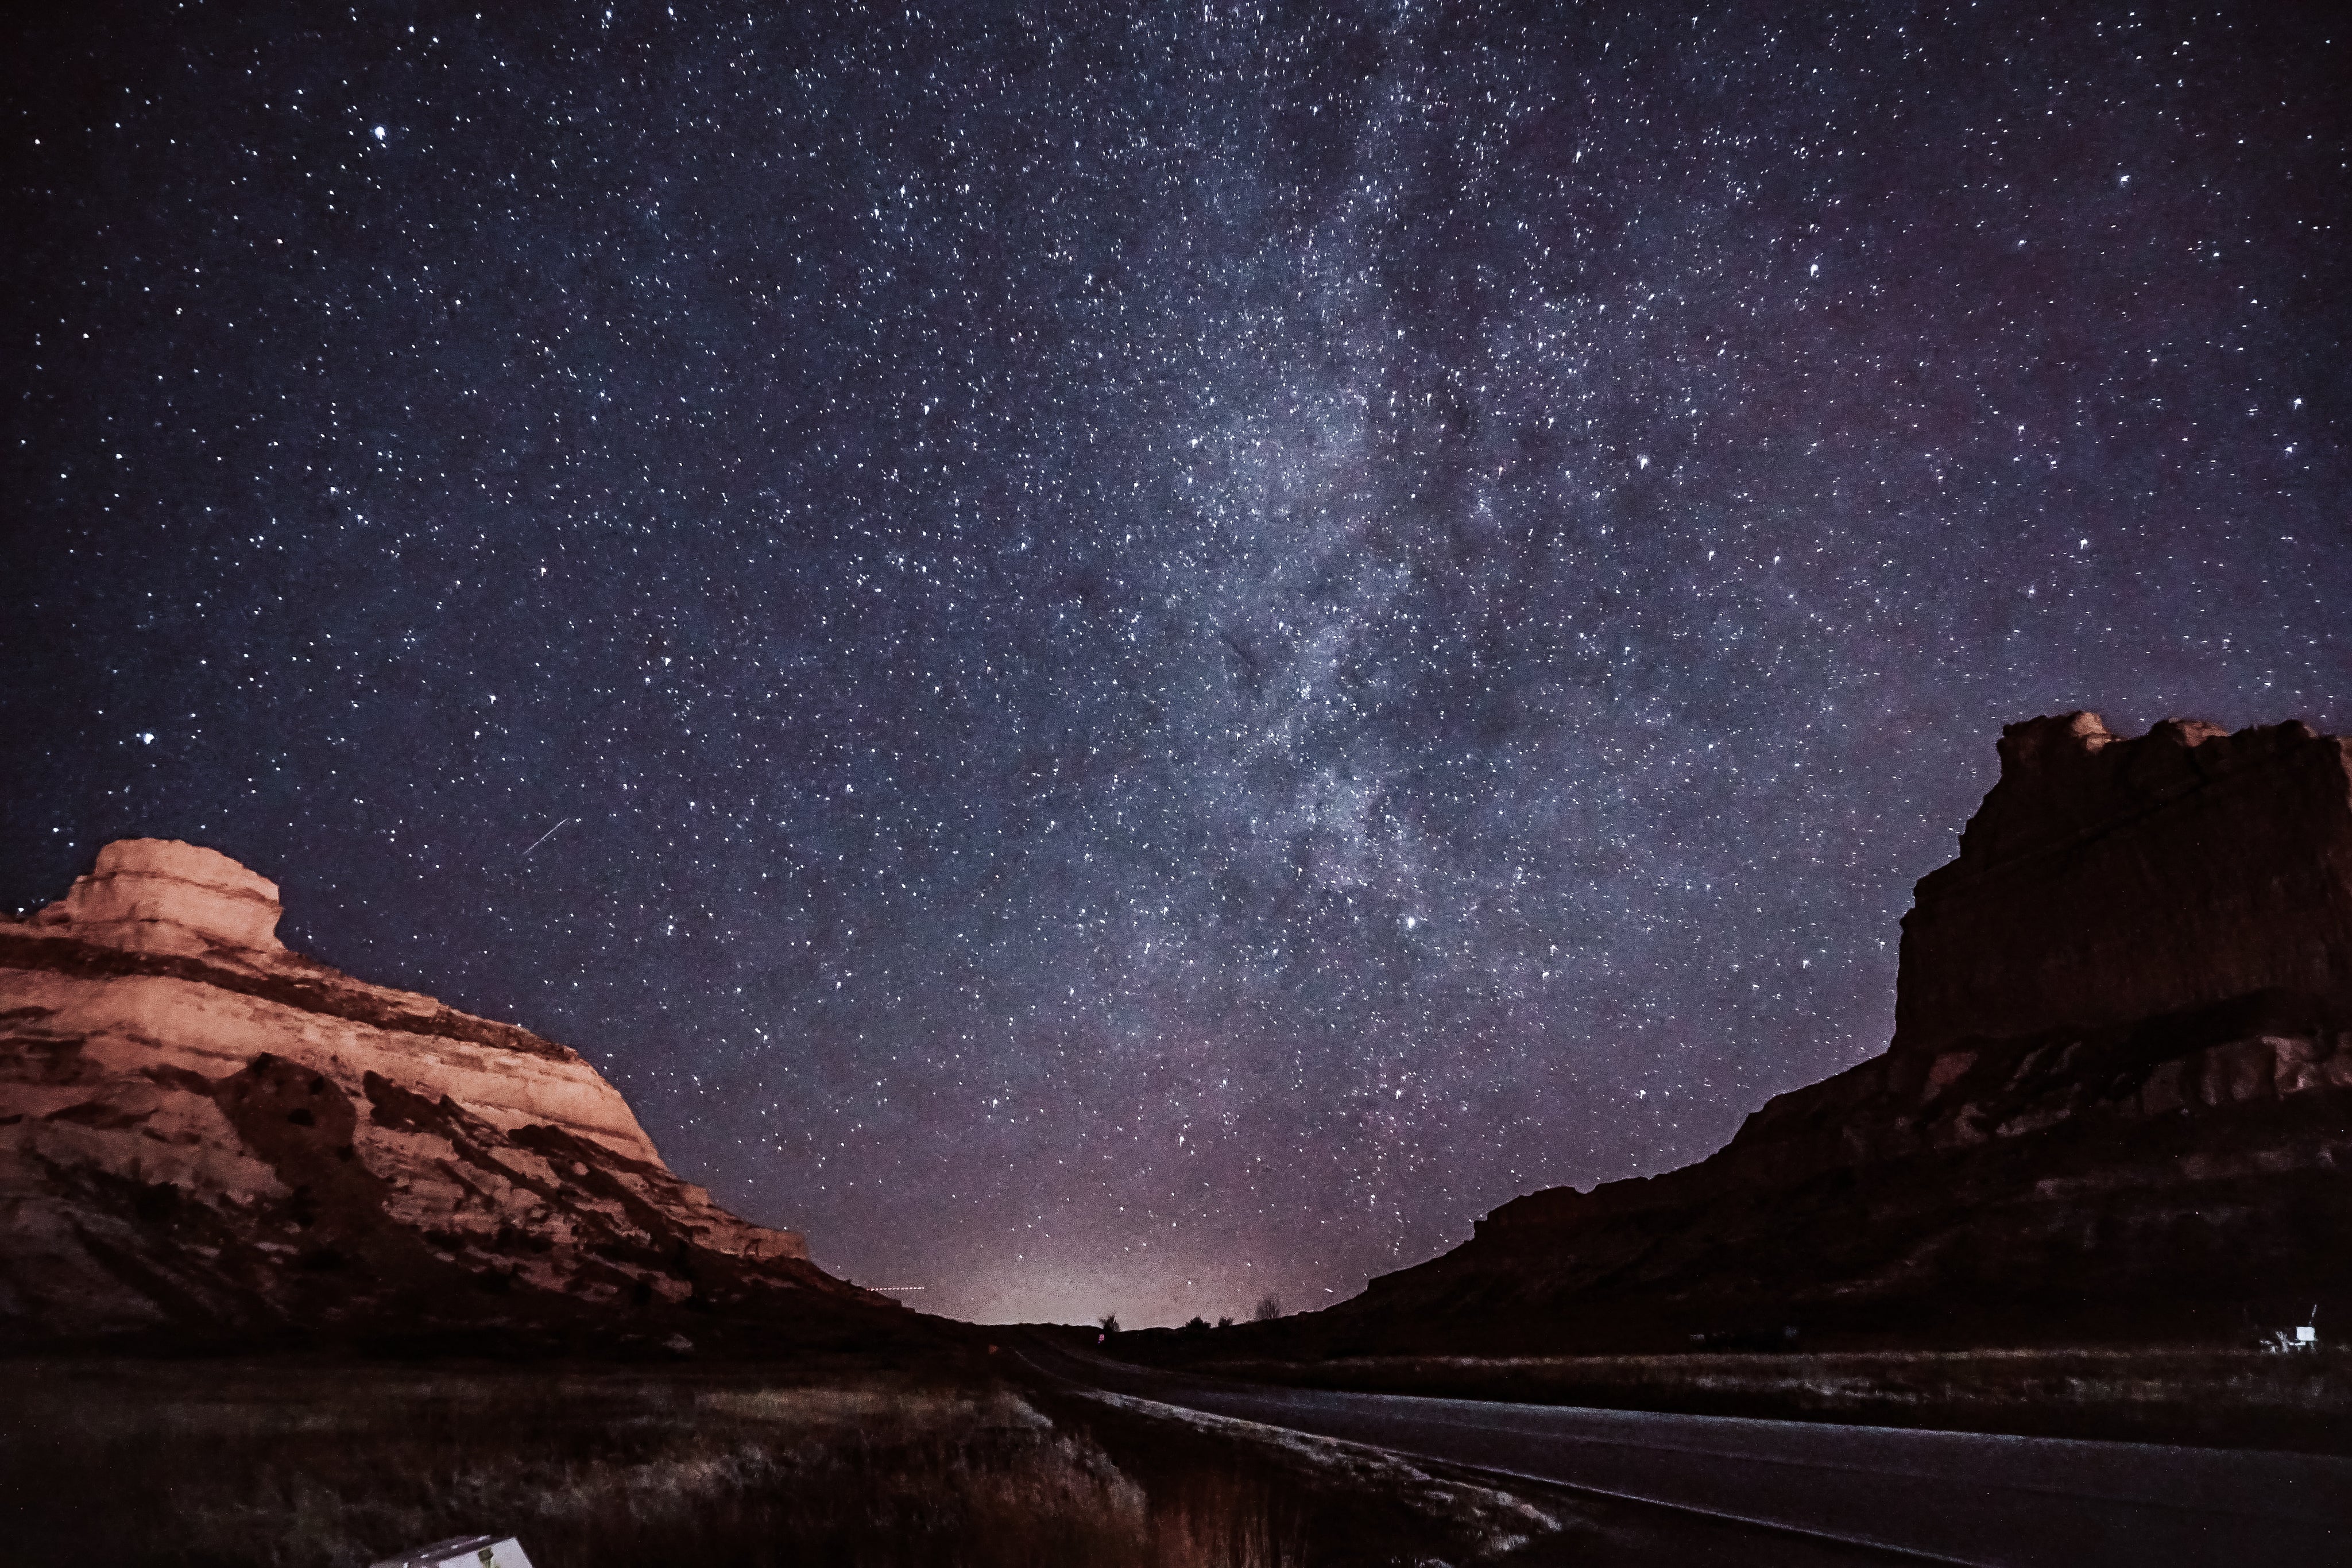 starry-skies-in-the-dessert-canyons.jpg